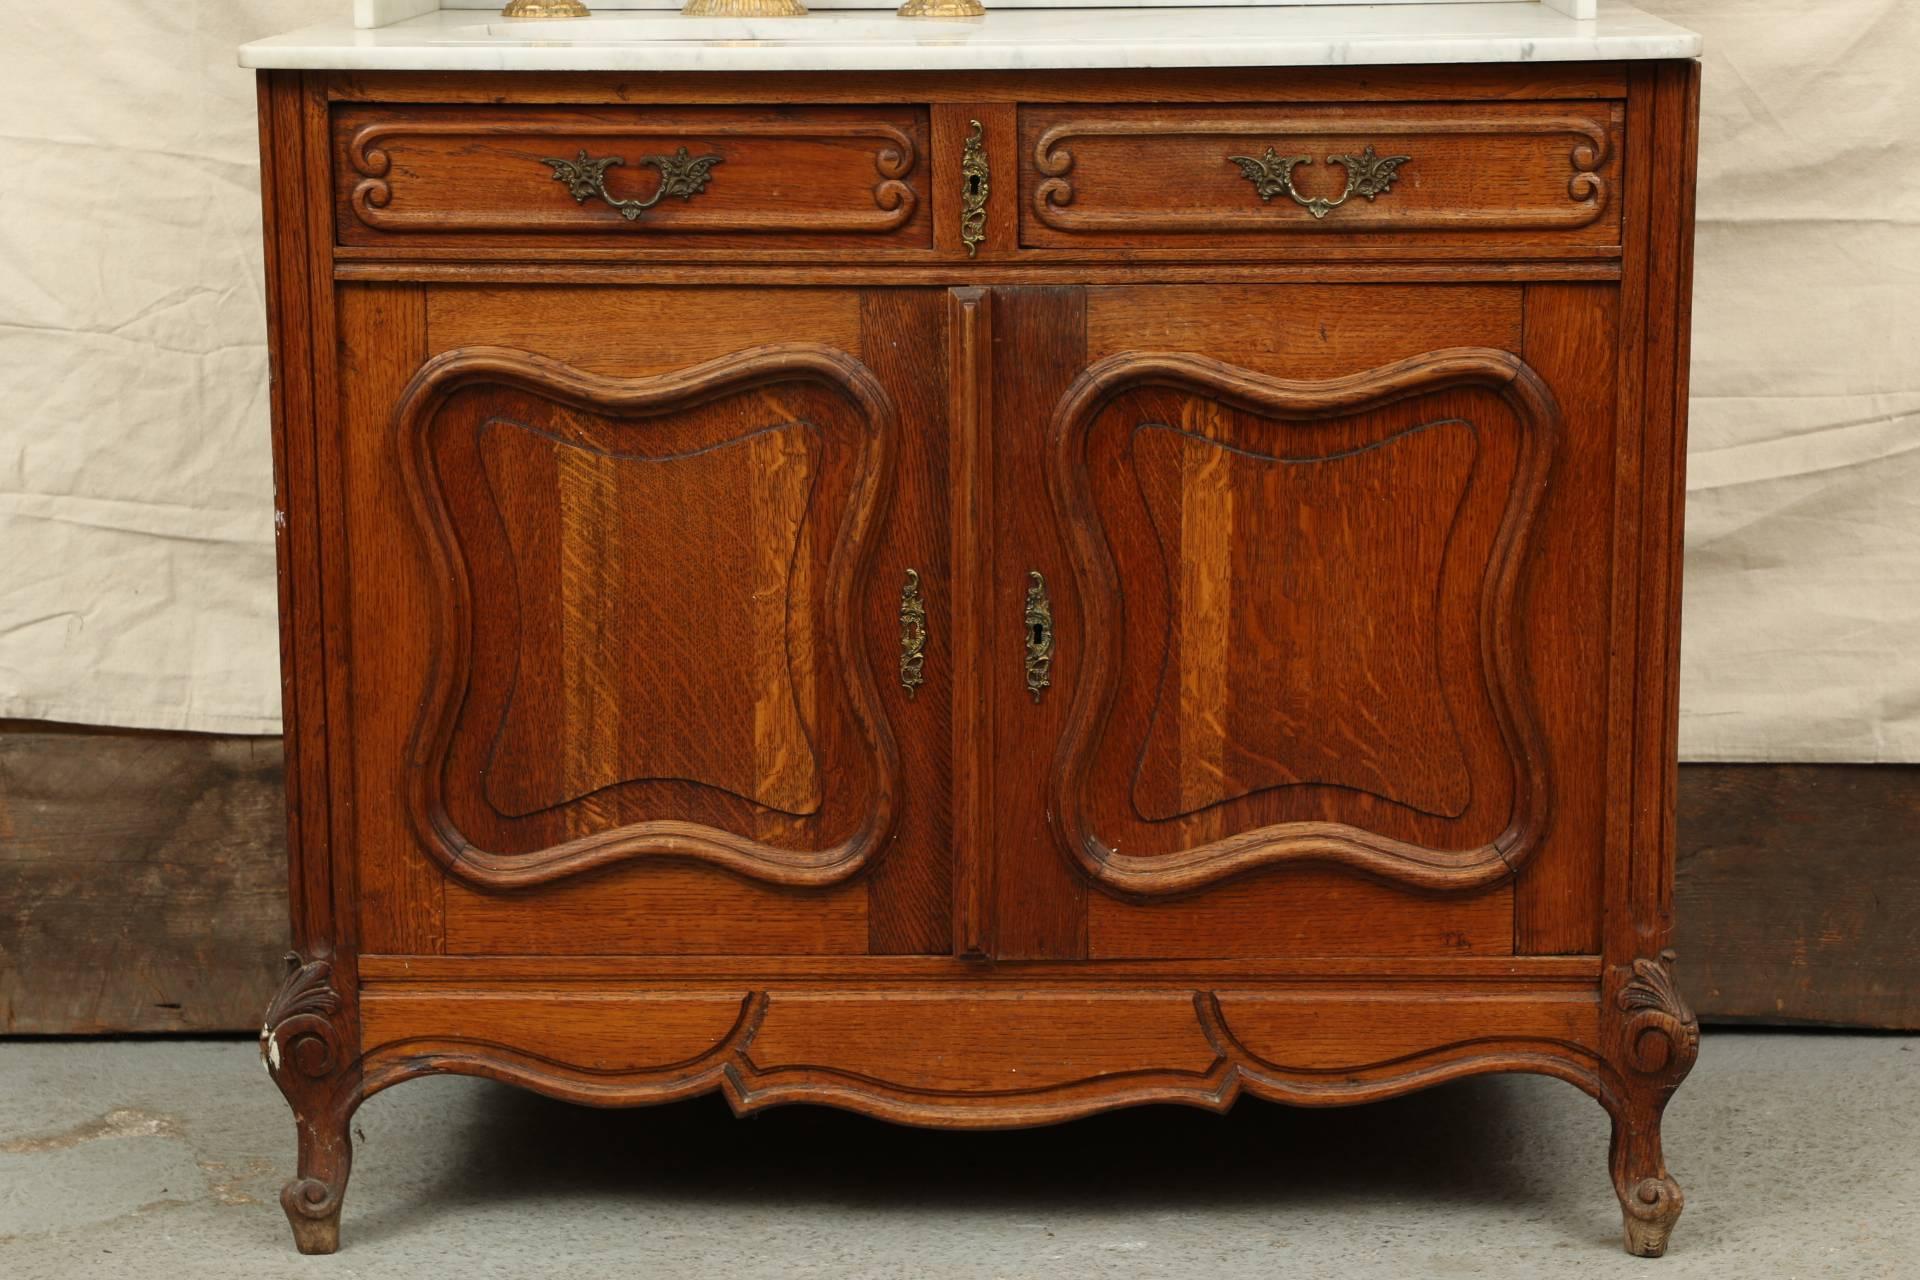 European Antique Continental Oak and Marble Vanity